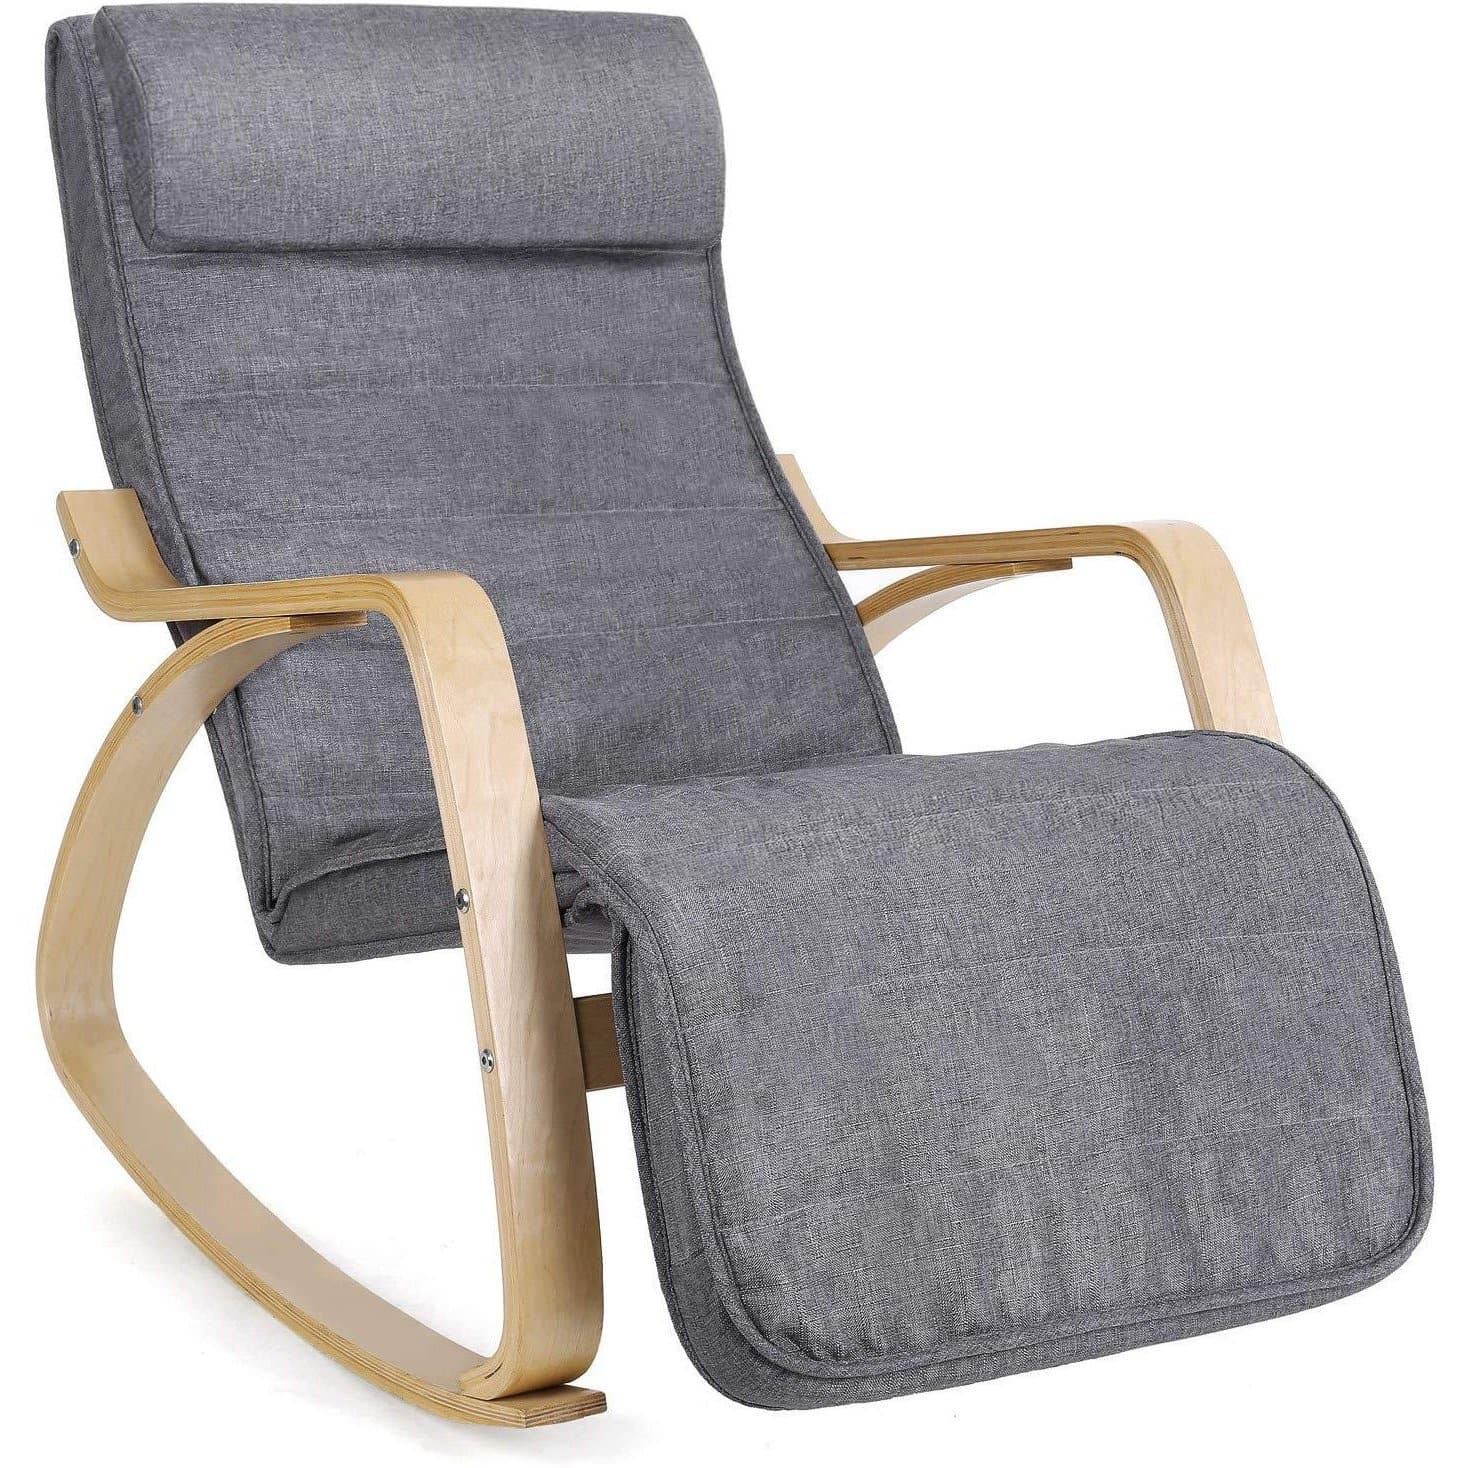 Nancy's Dunn Loring Rocking Chair With Footrest - Adjustable Lounger - Relax Chair - Armchair